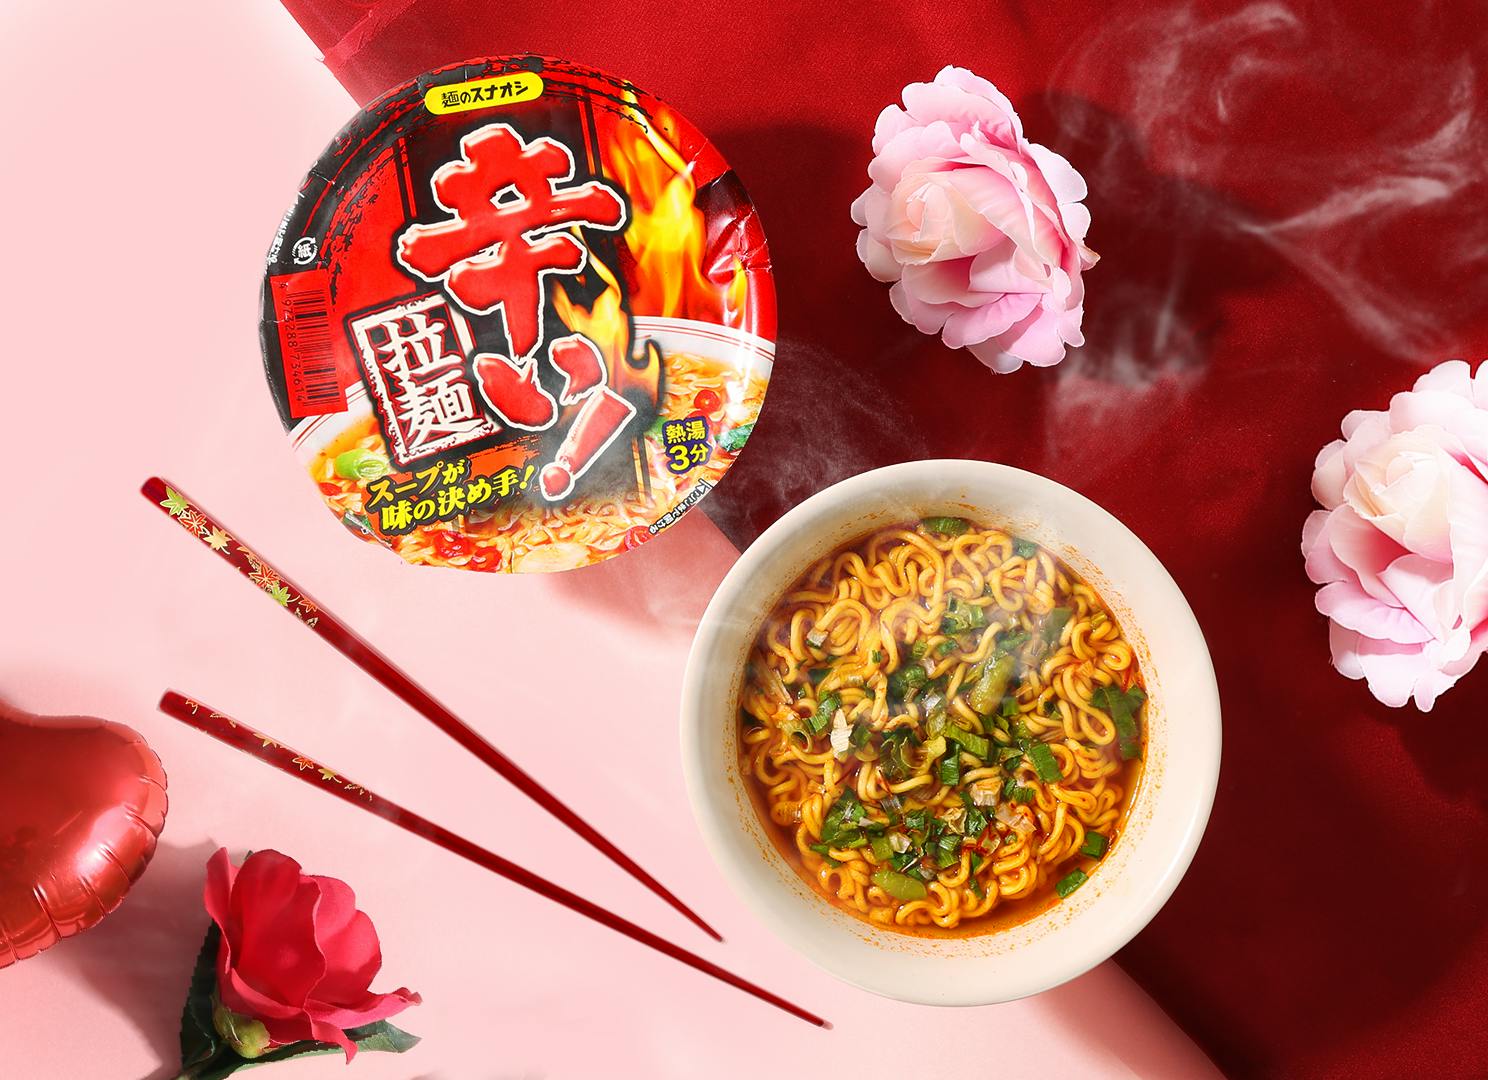 Spicy noodles are near pink flowers and red roses.